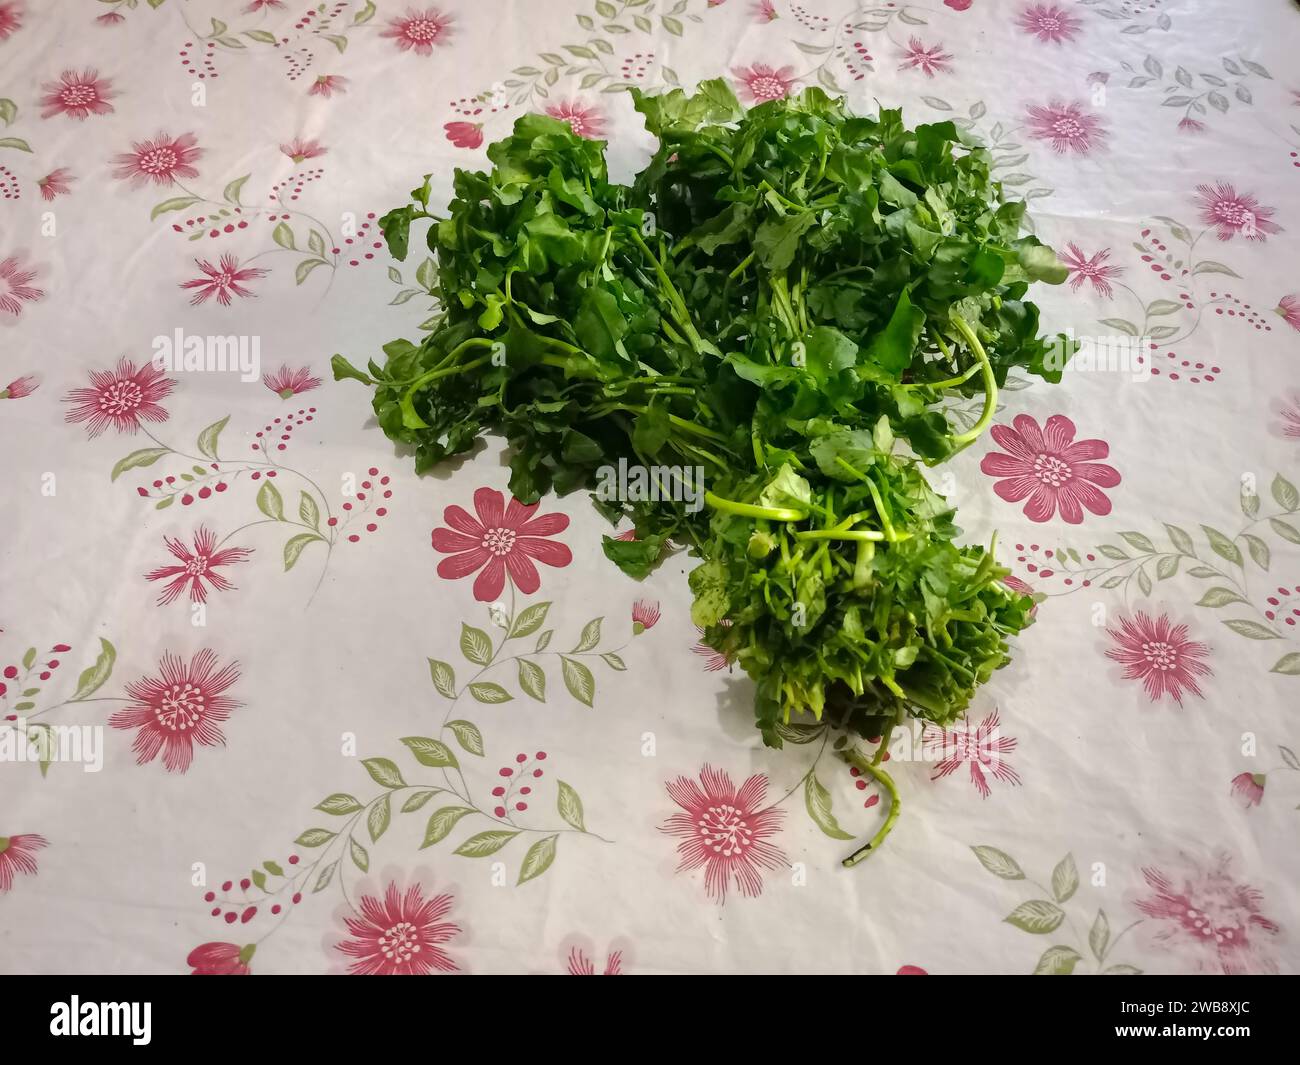 fresh green vegetables on the table with floral patterns Stock Photo